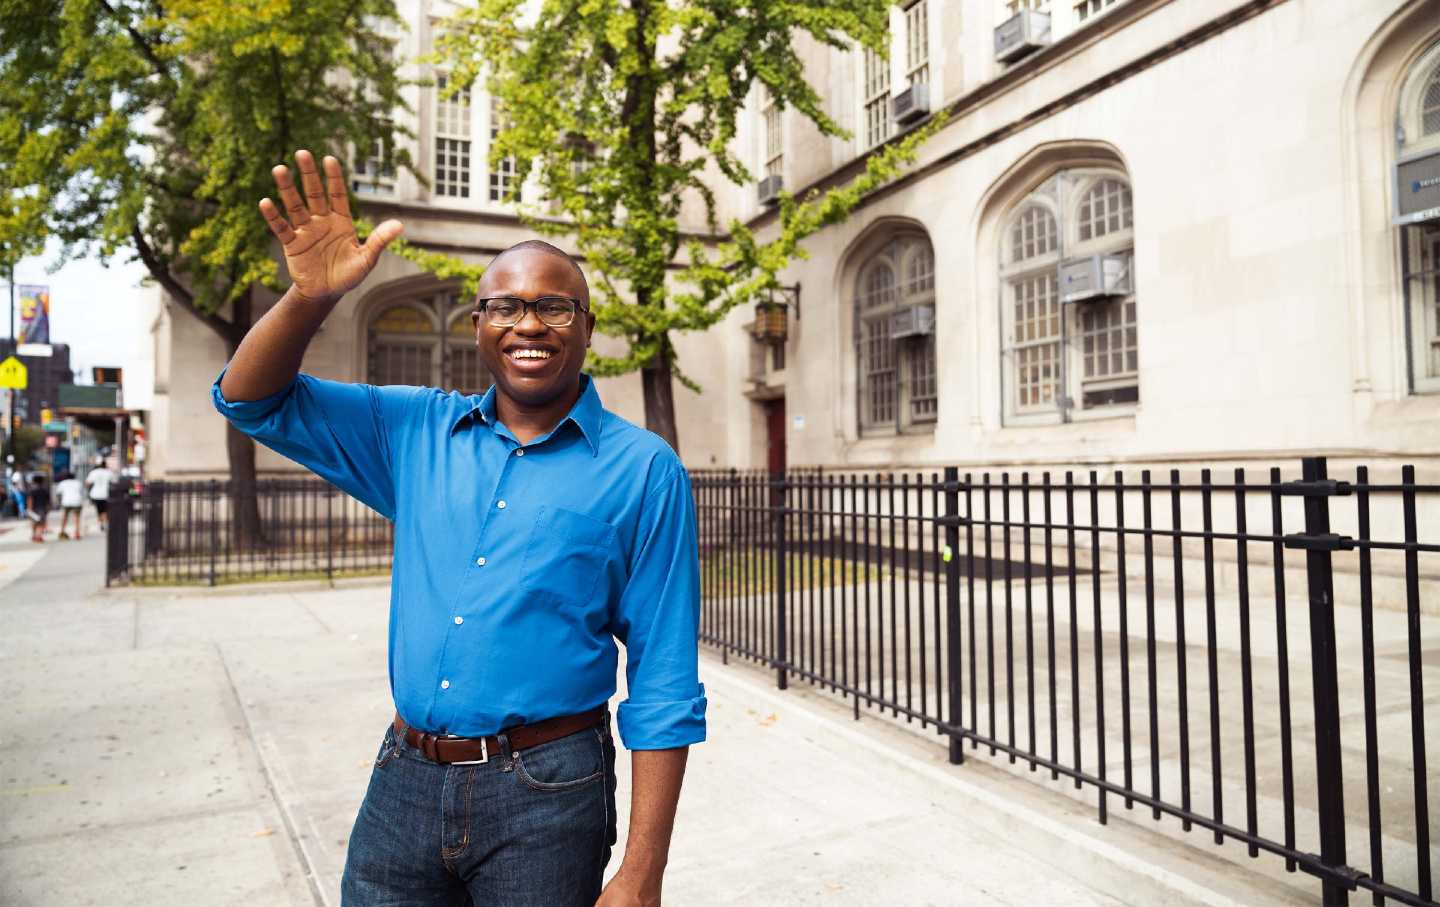 David Alexis smiles and waves to the camera, wearing a blue shirt and jeans outside a Brooklyn high school.